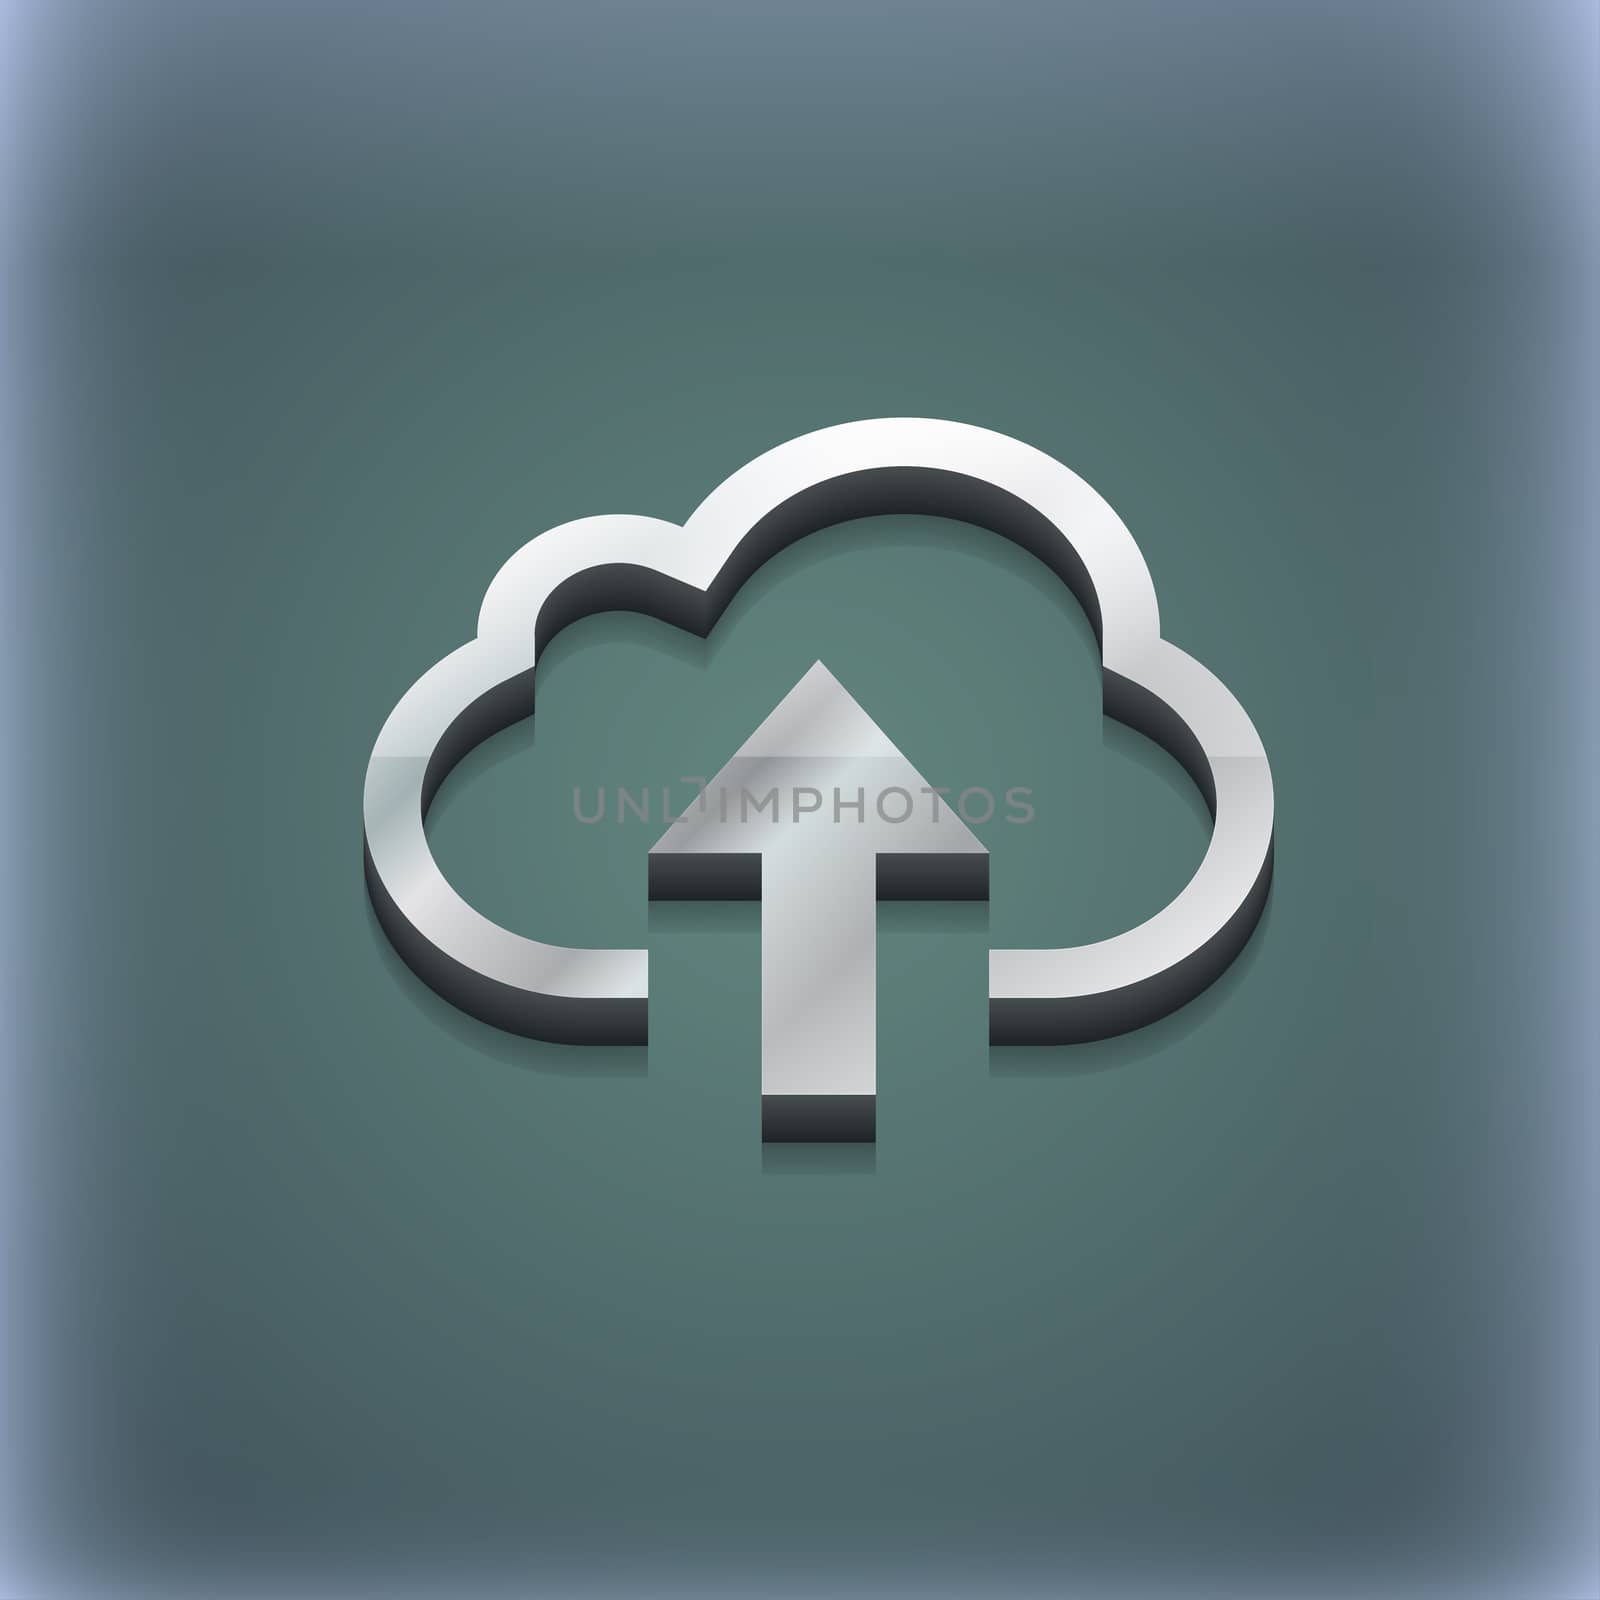 Upload from cloud icon symbol. 3D style. Trendy, modern design with space for your text illustration. Raster version